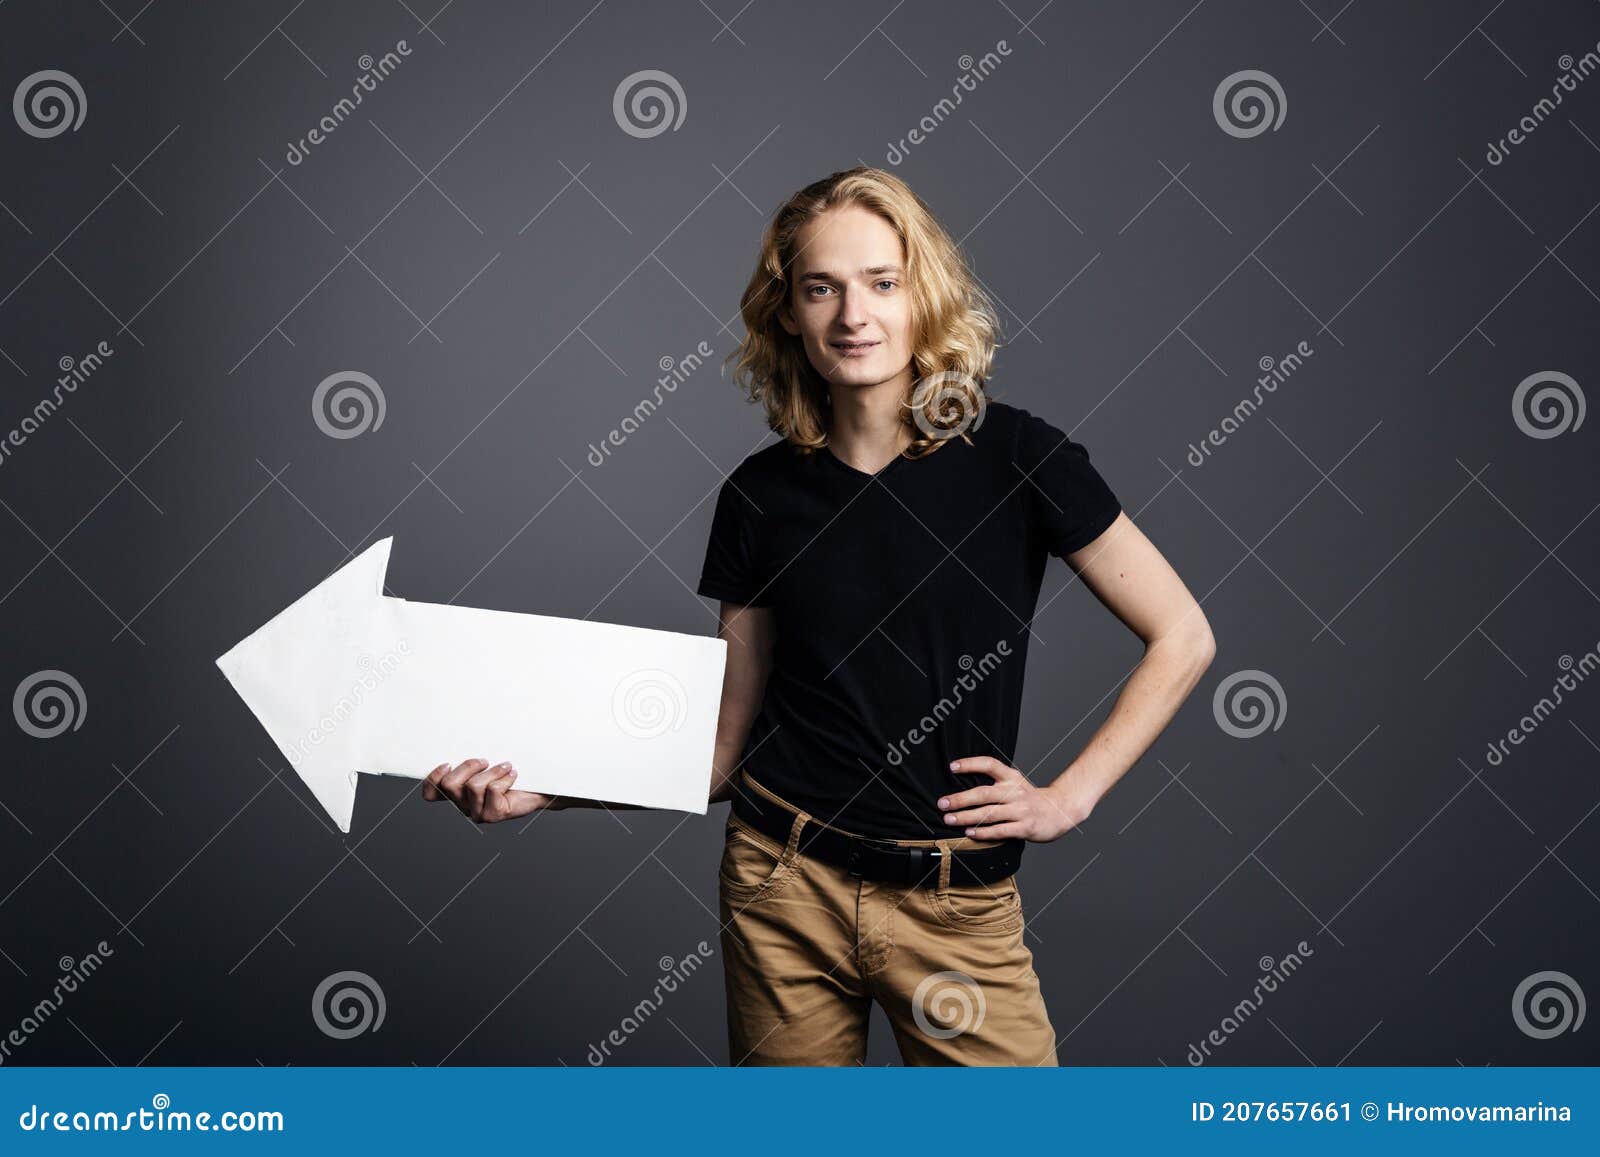 1. Male Model with Long Blonde Hair - wide 5